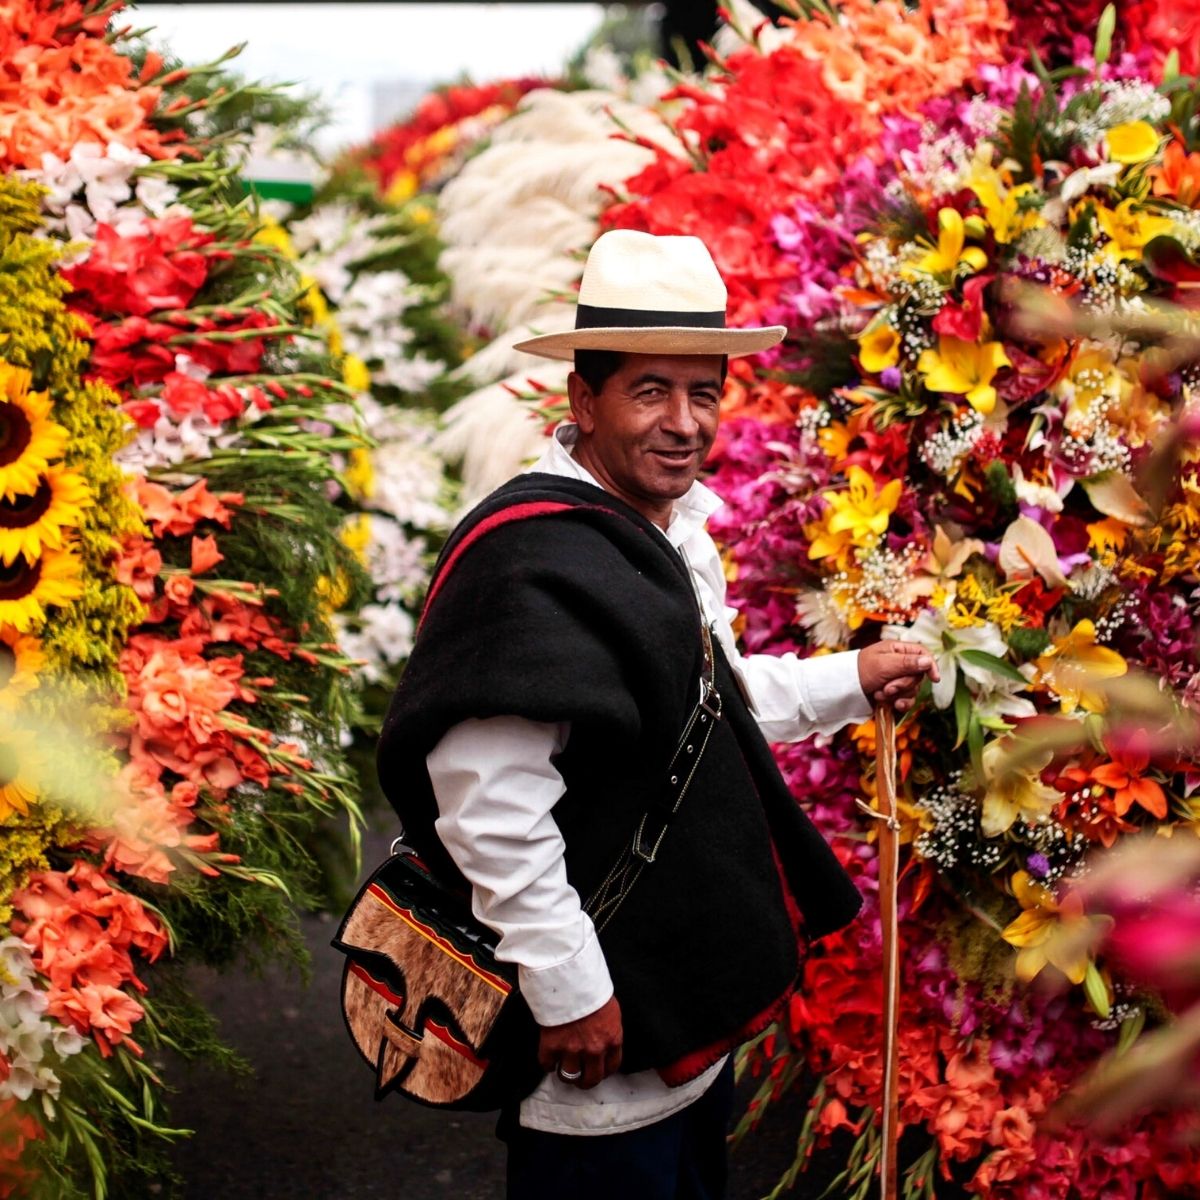 blown-away-by-the-amazing-beauty-of-these-backpacks-at-feria-de-las-flores-in-medellin-featured